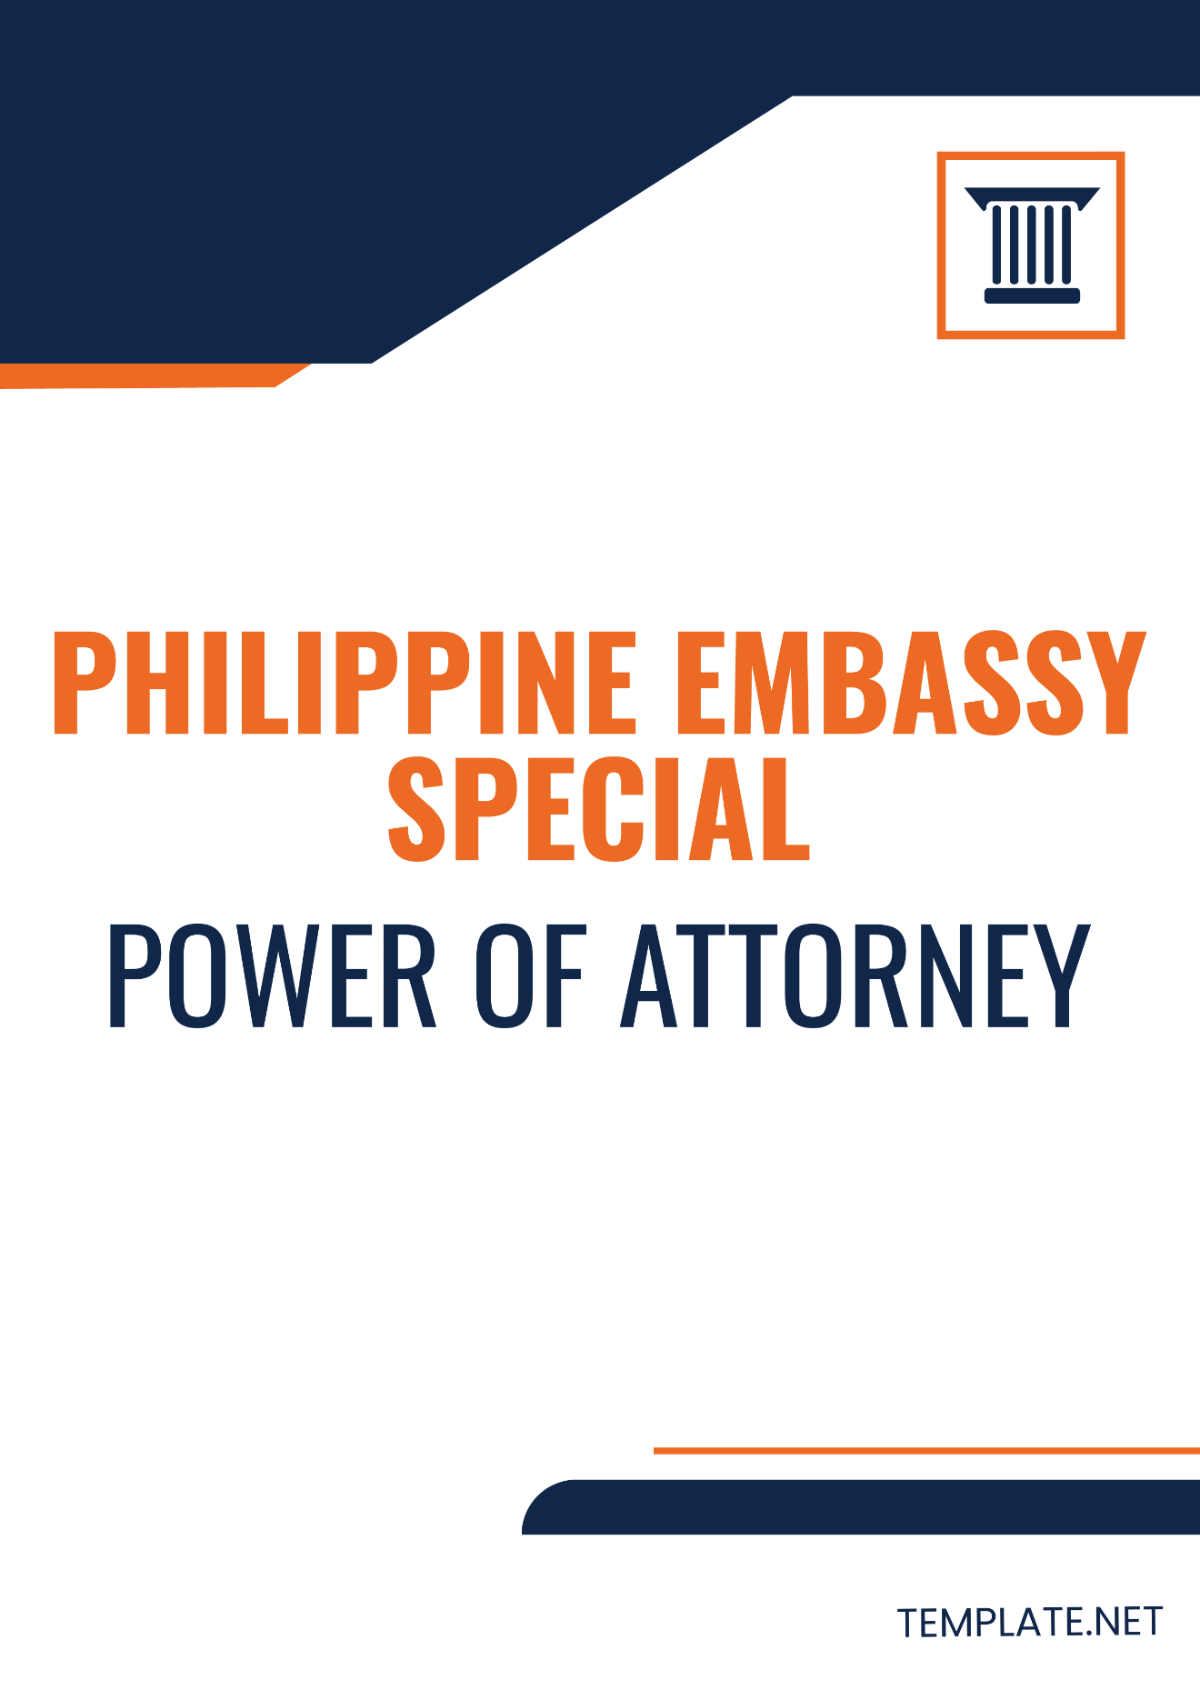 Philippine Embassy Special Power of Attorney Template